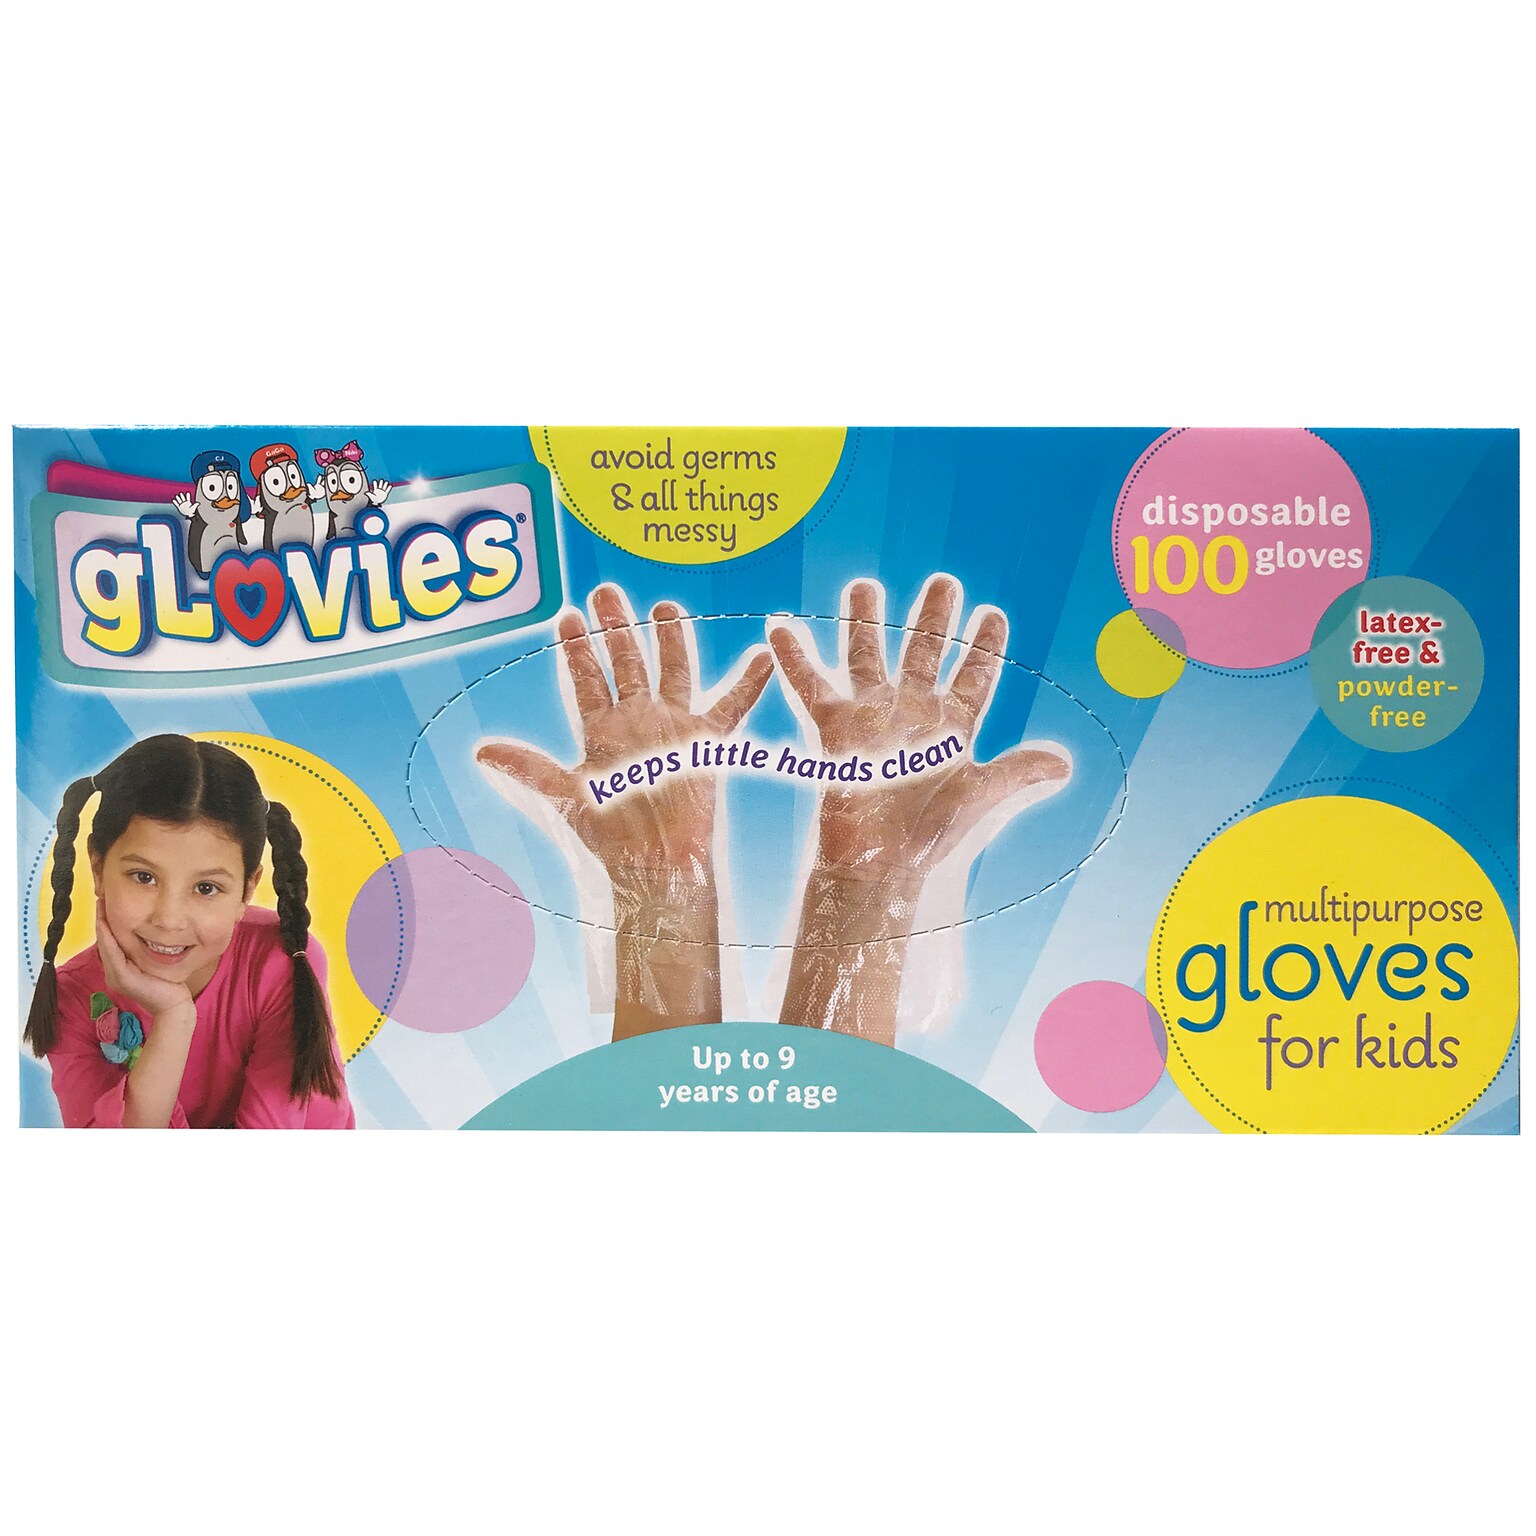 gLovies Plastic Food Safe Disposable Gloves for Kids, Clear, 100 Gloves/Box (MKBLX002B100)